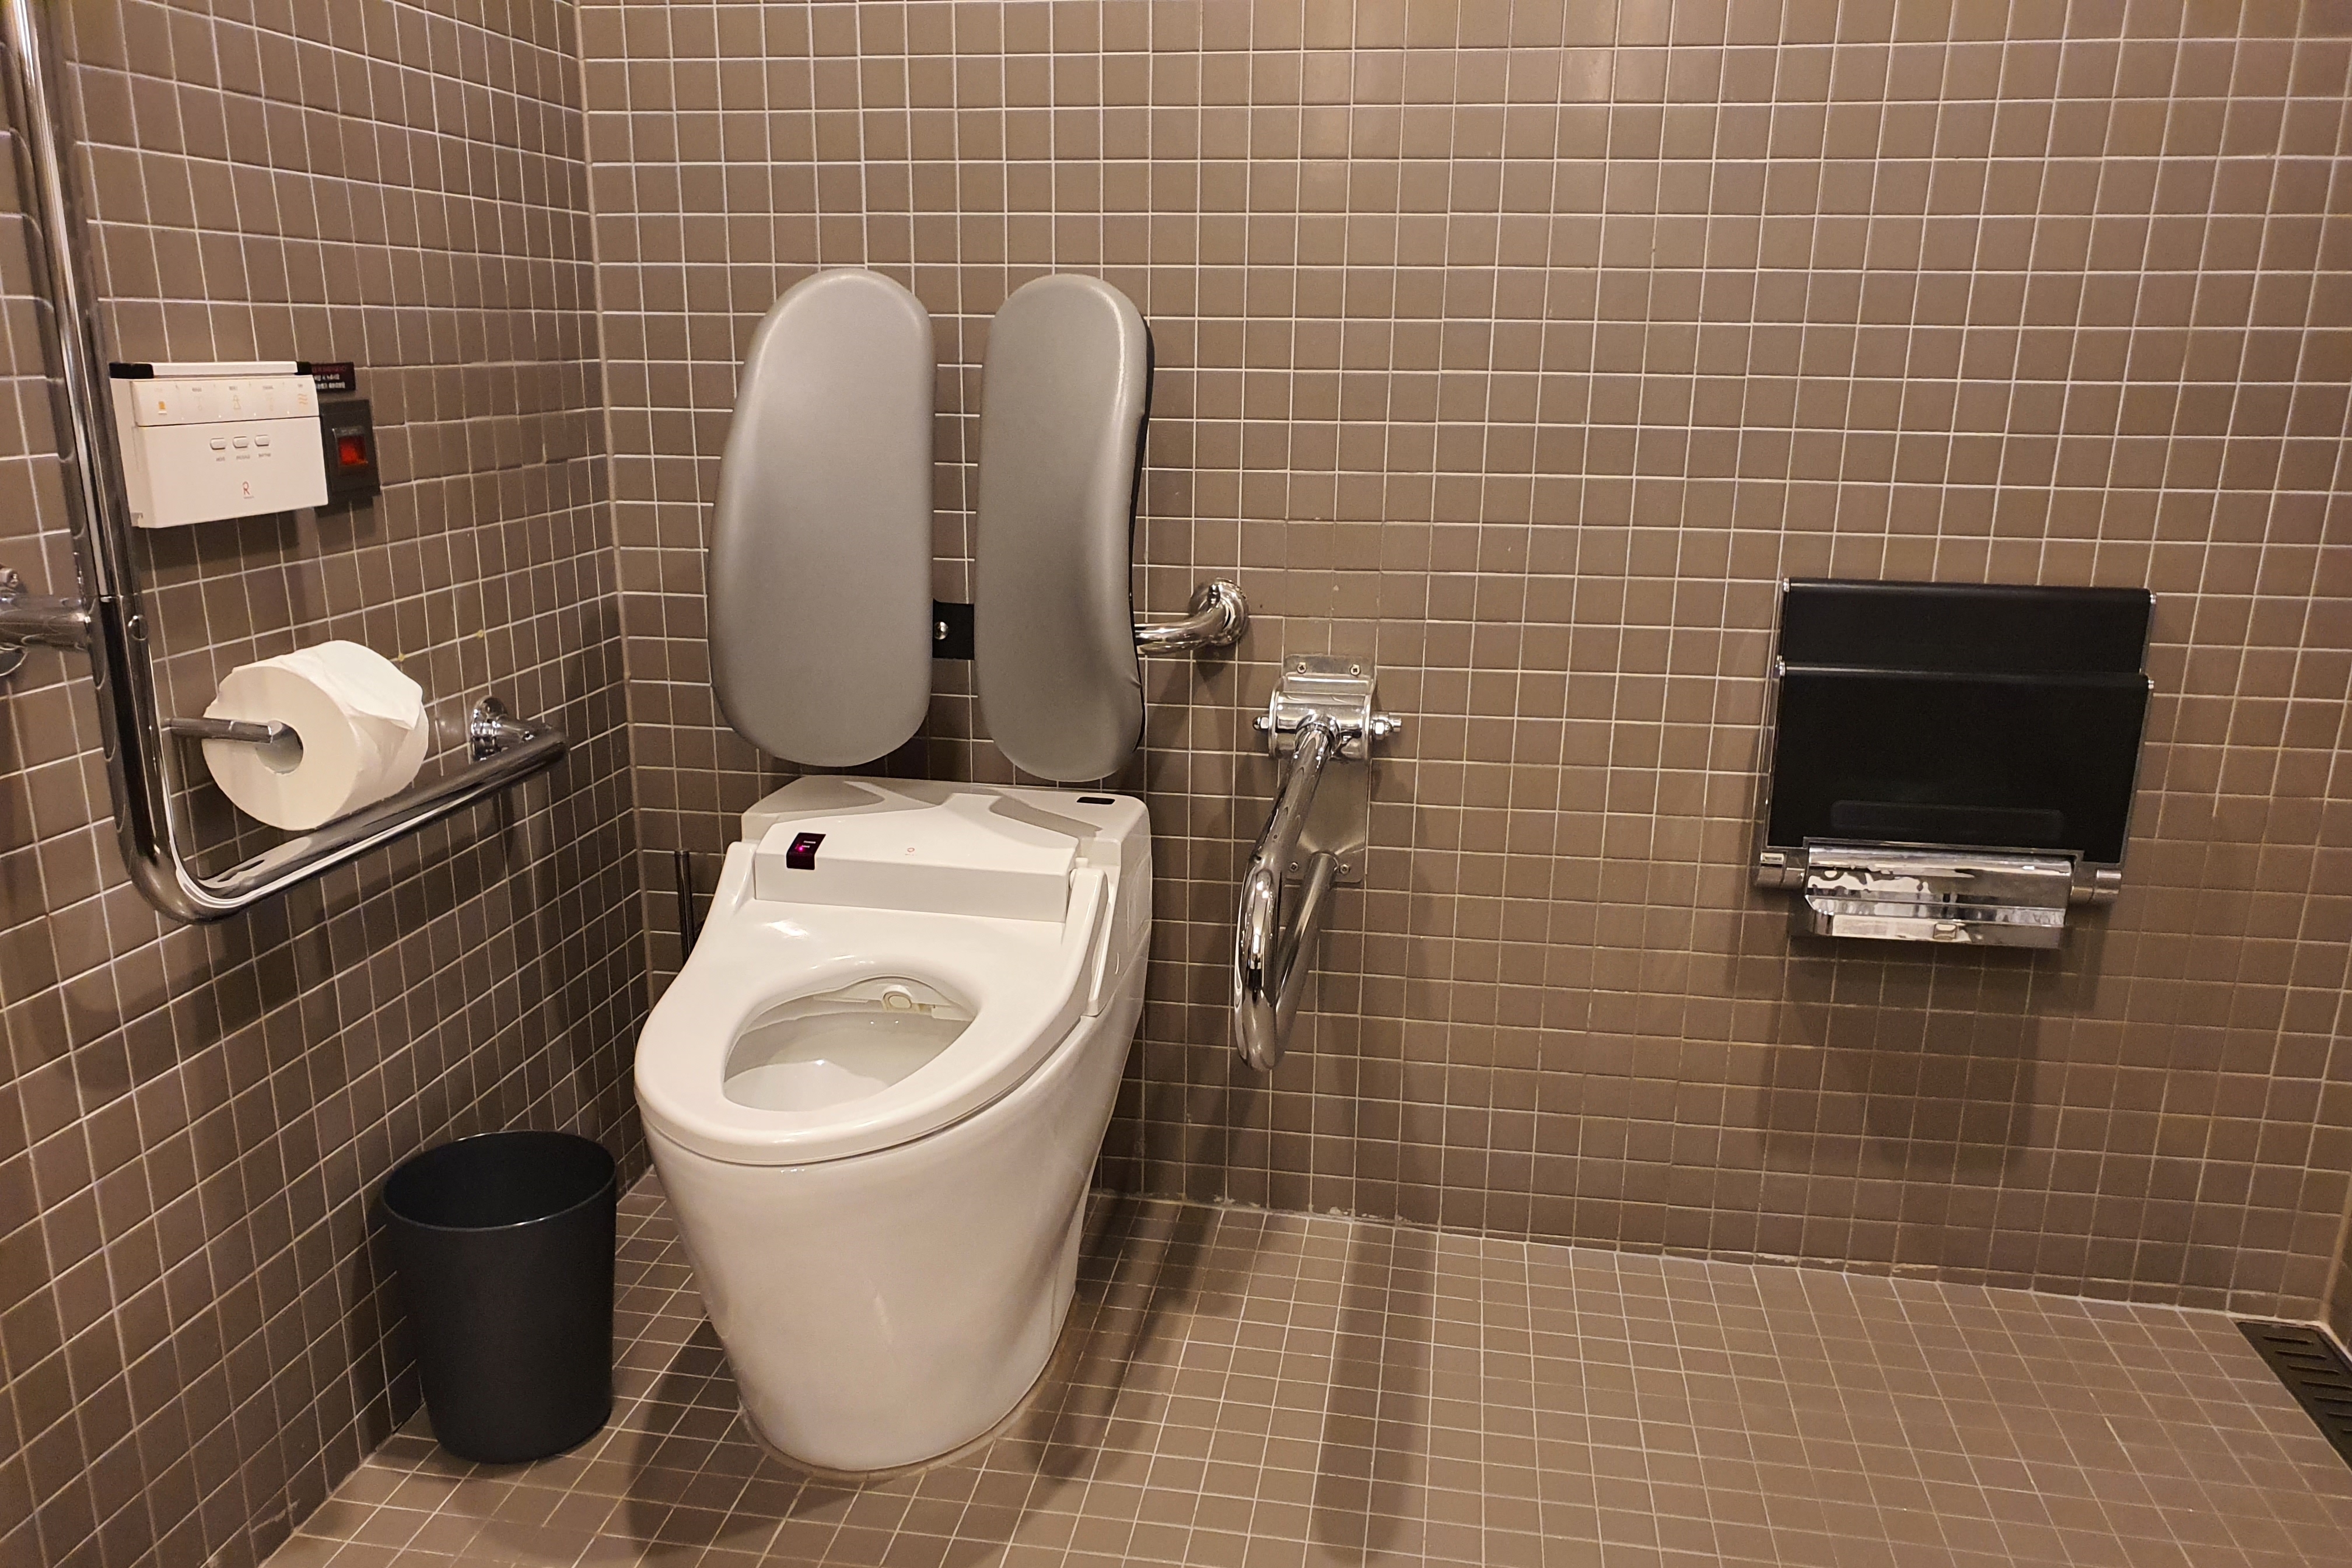 Accessible restroom in the guestroom0 : A toilet and a wall-mounted shower chair installed side-by-side